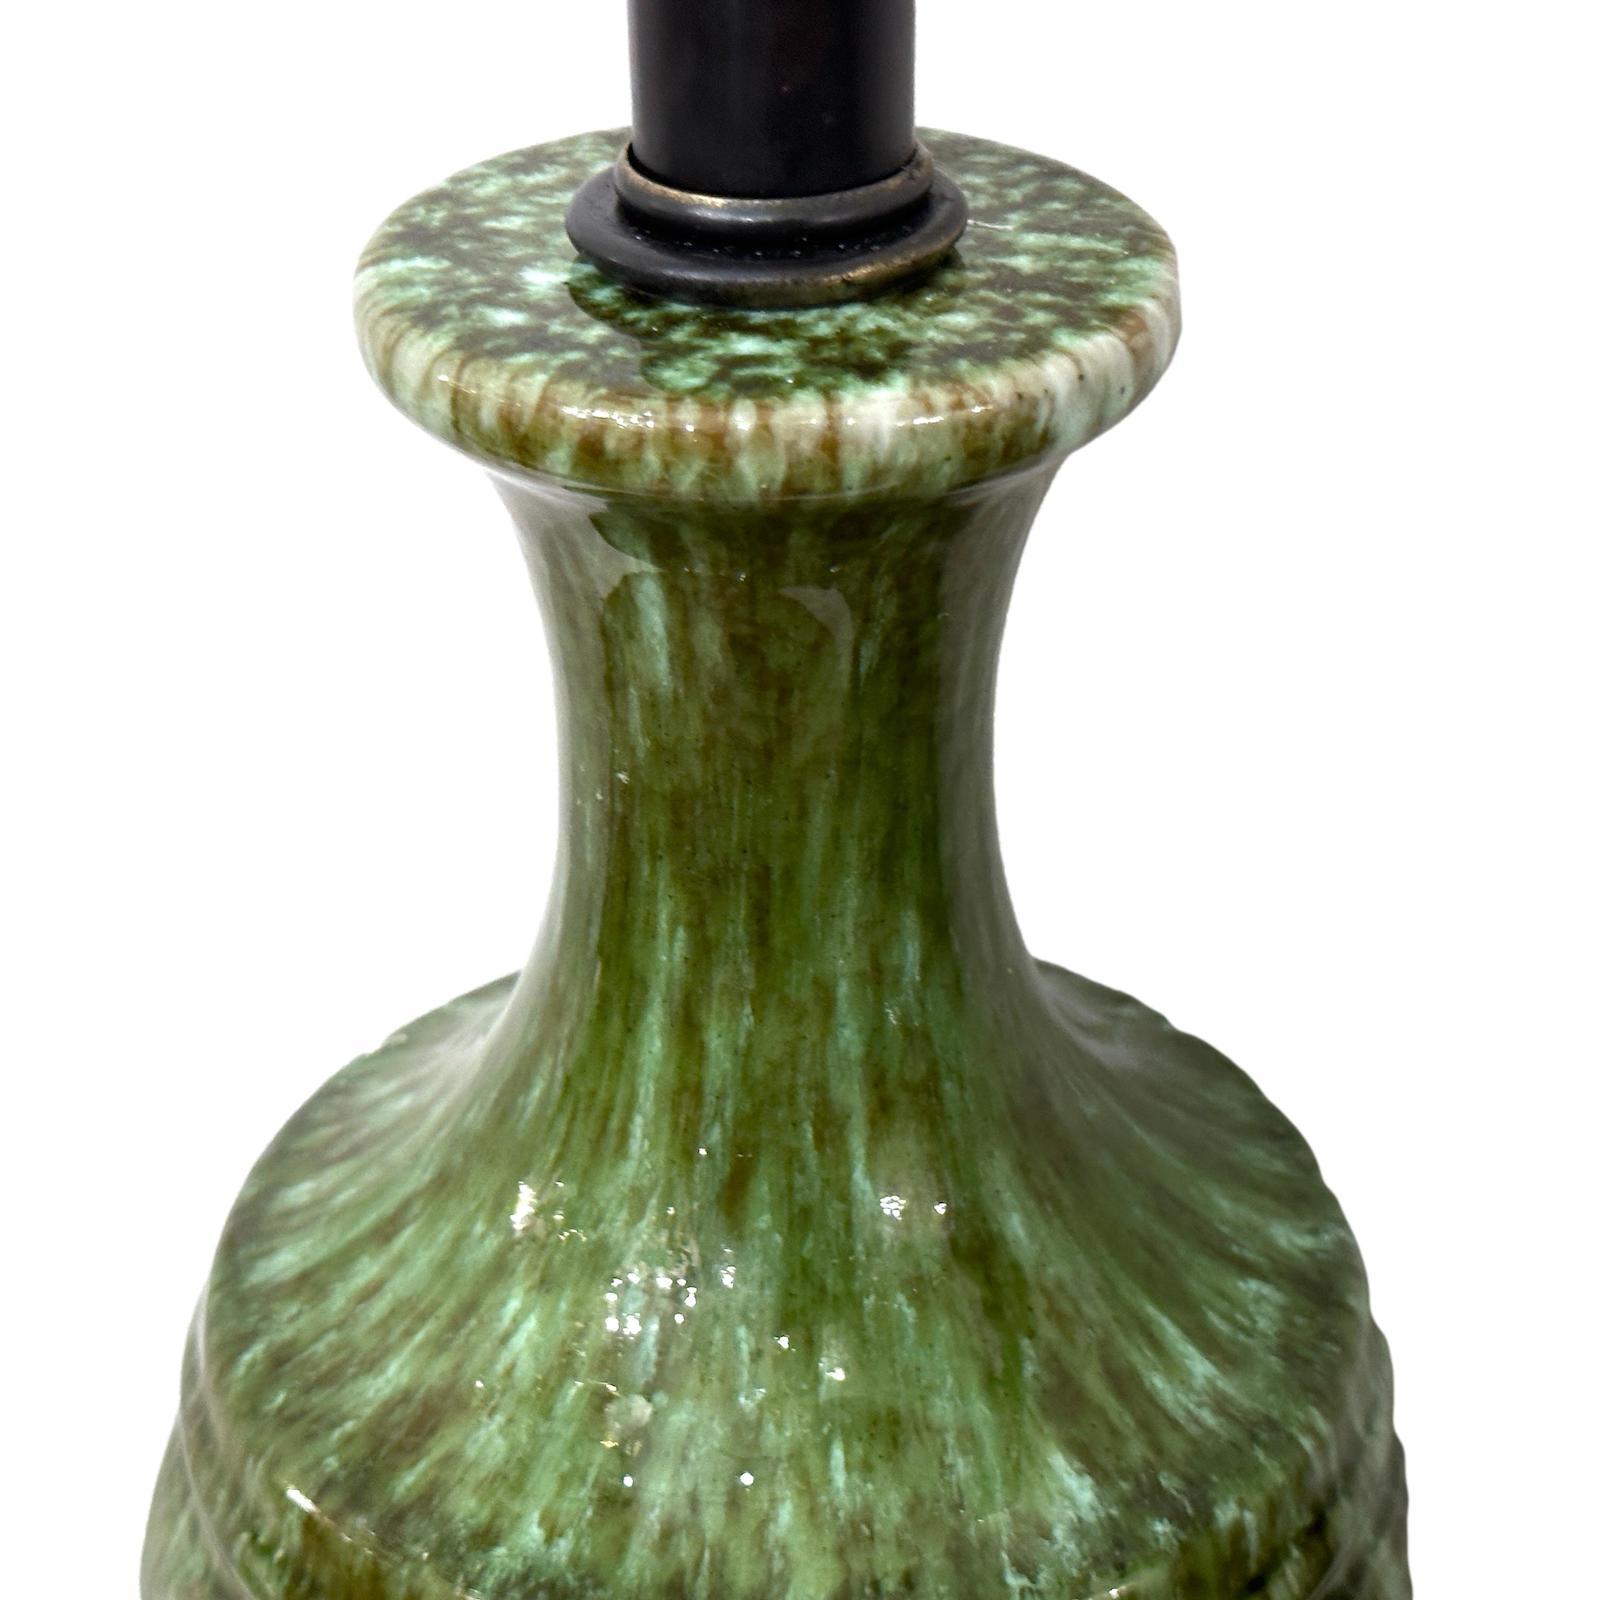 Pair of circa 1960's Italian green glazed porcelain table lamps.

Measurements:
Height of body: 22